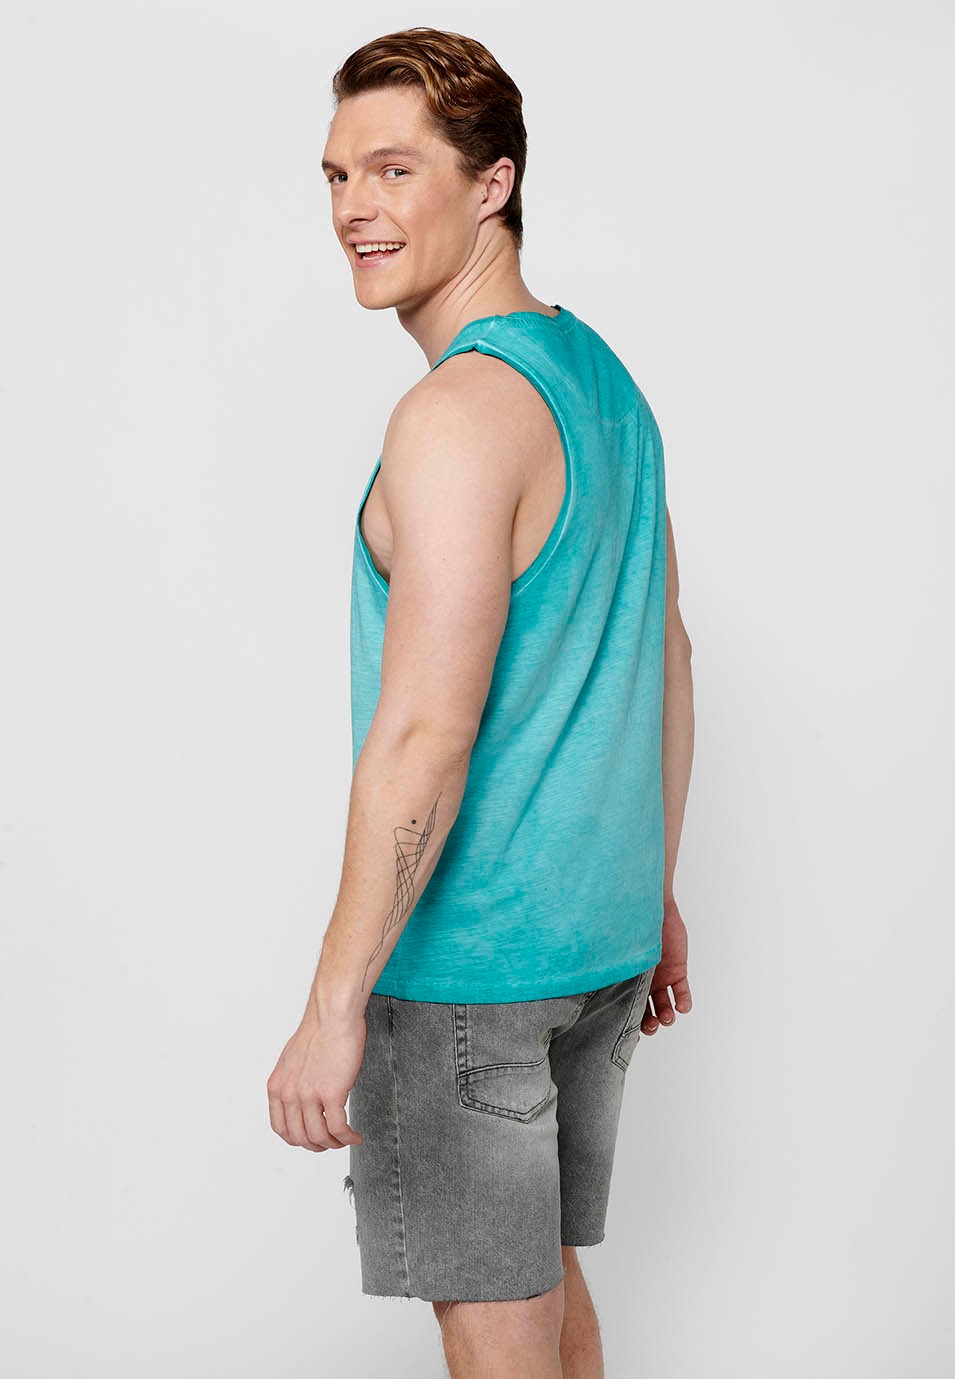 Cotton tank top, with front print, green color for men